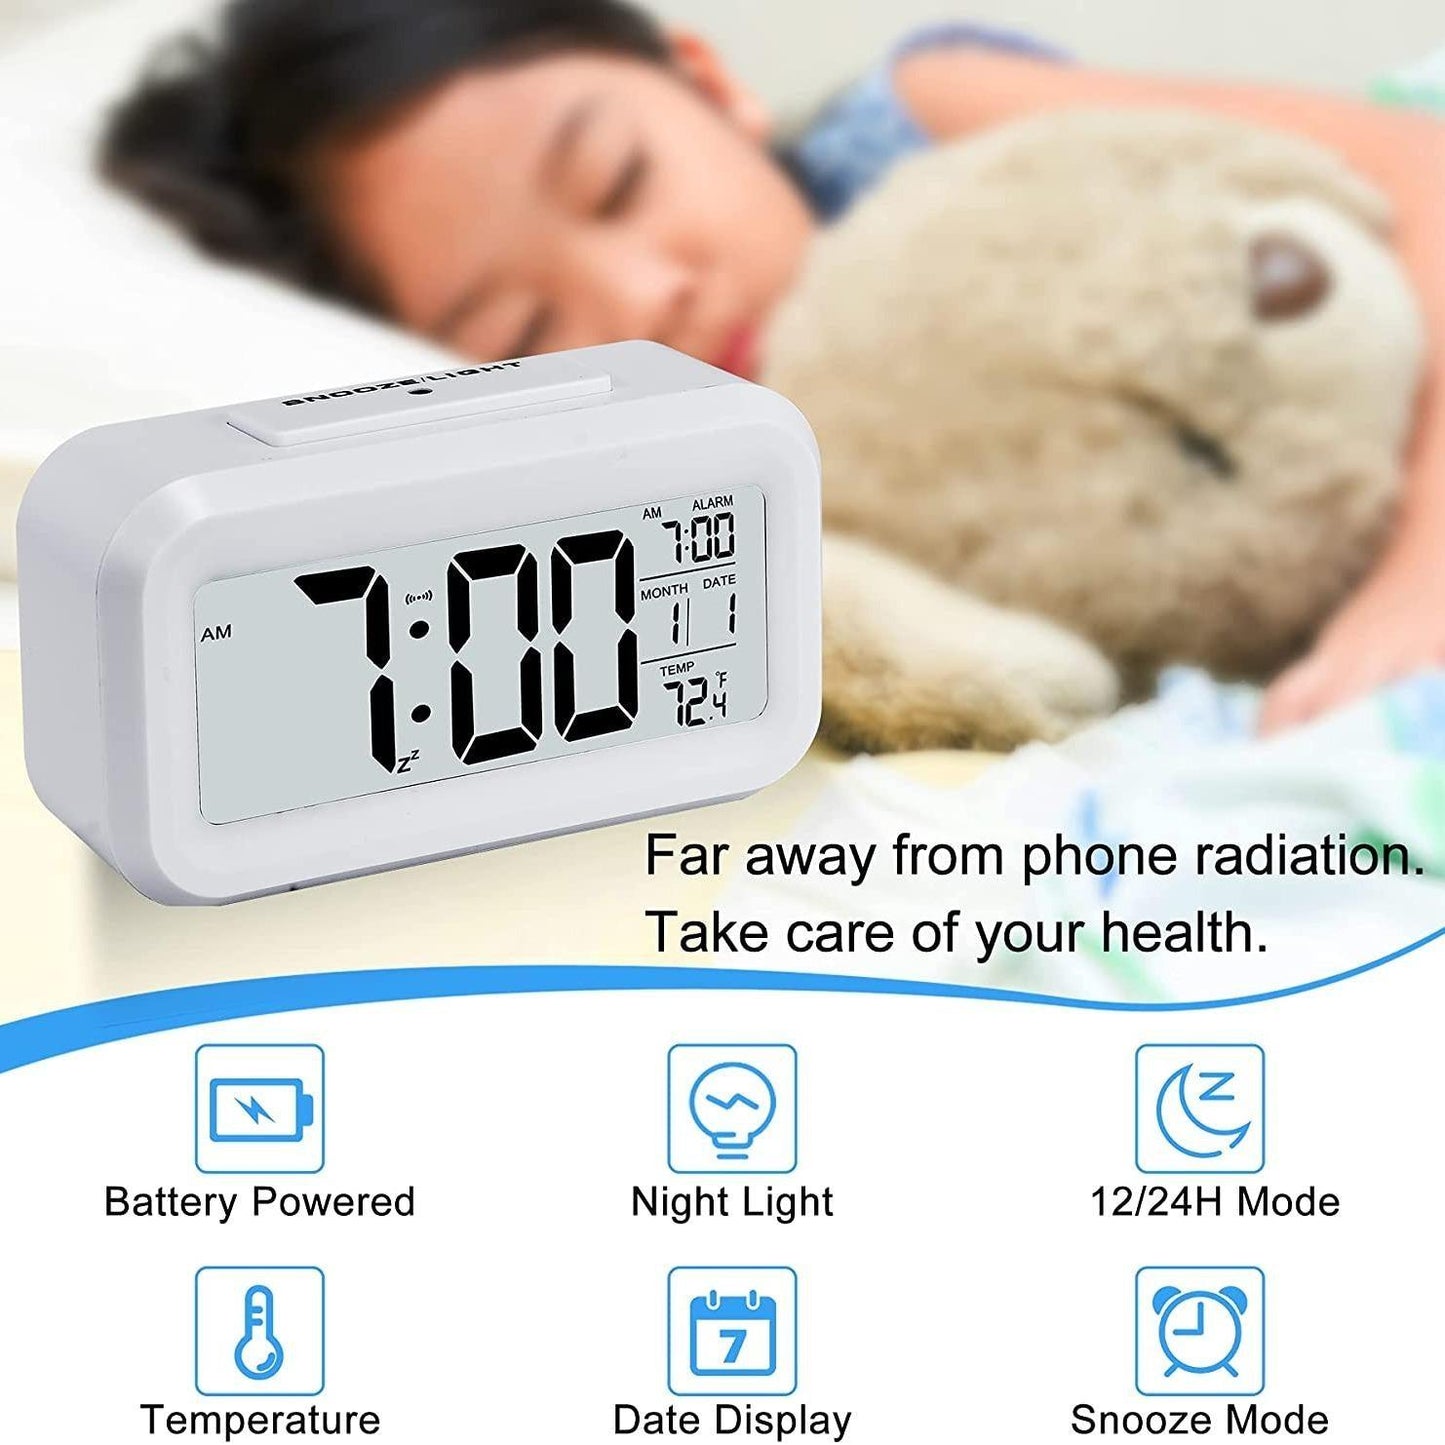 Digital Alarm Clock Big LED Display Bedside Clock 12/24Hr Snooze Night Light,Battery Clock with Date Calendar Temperature for Bedroom Home Office Wintory